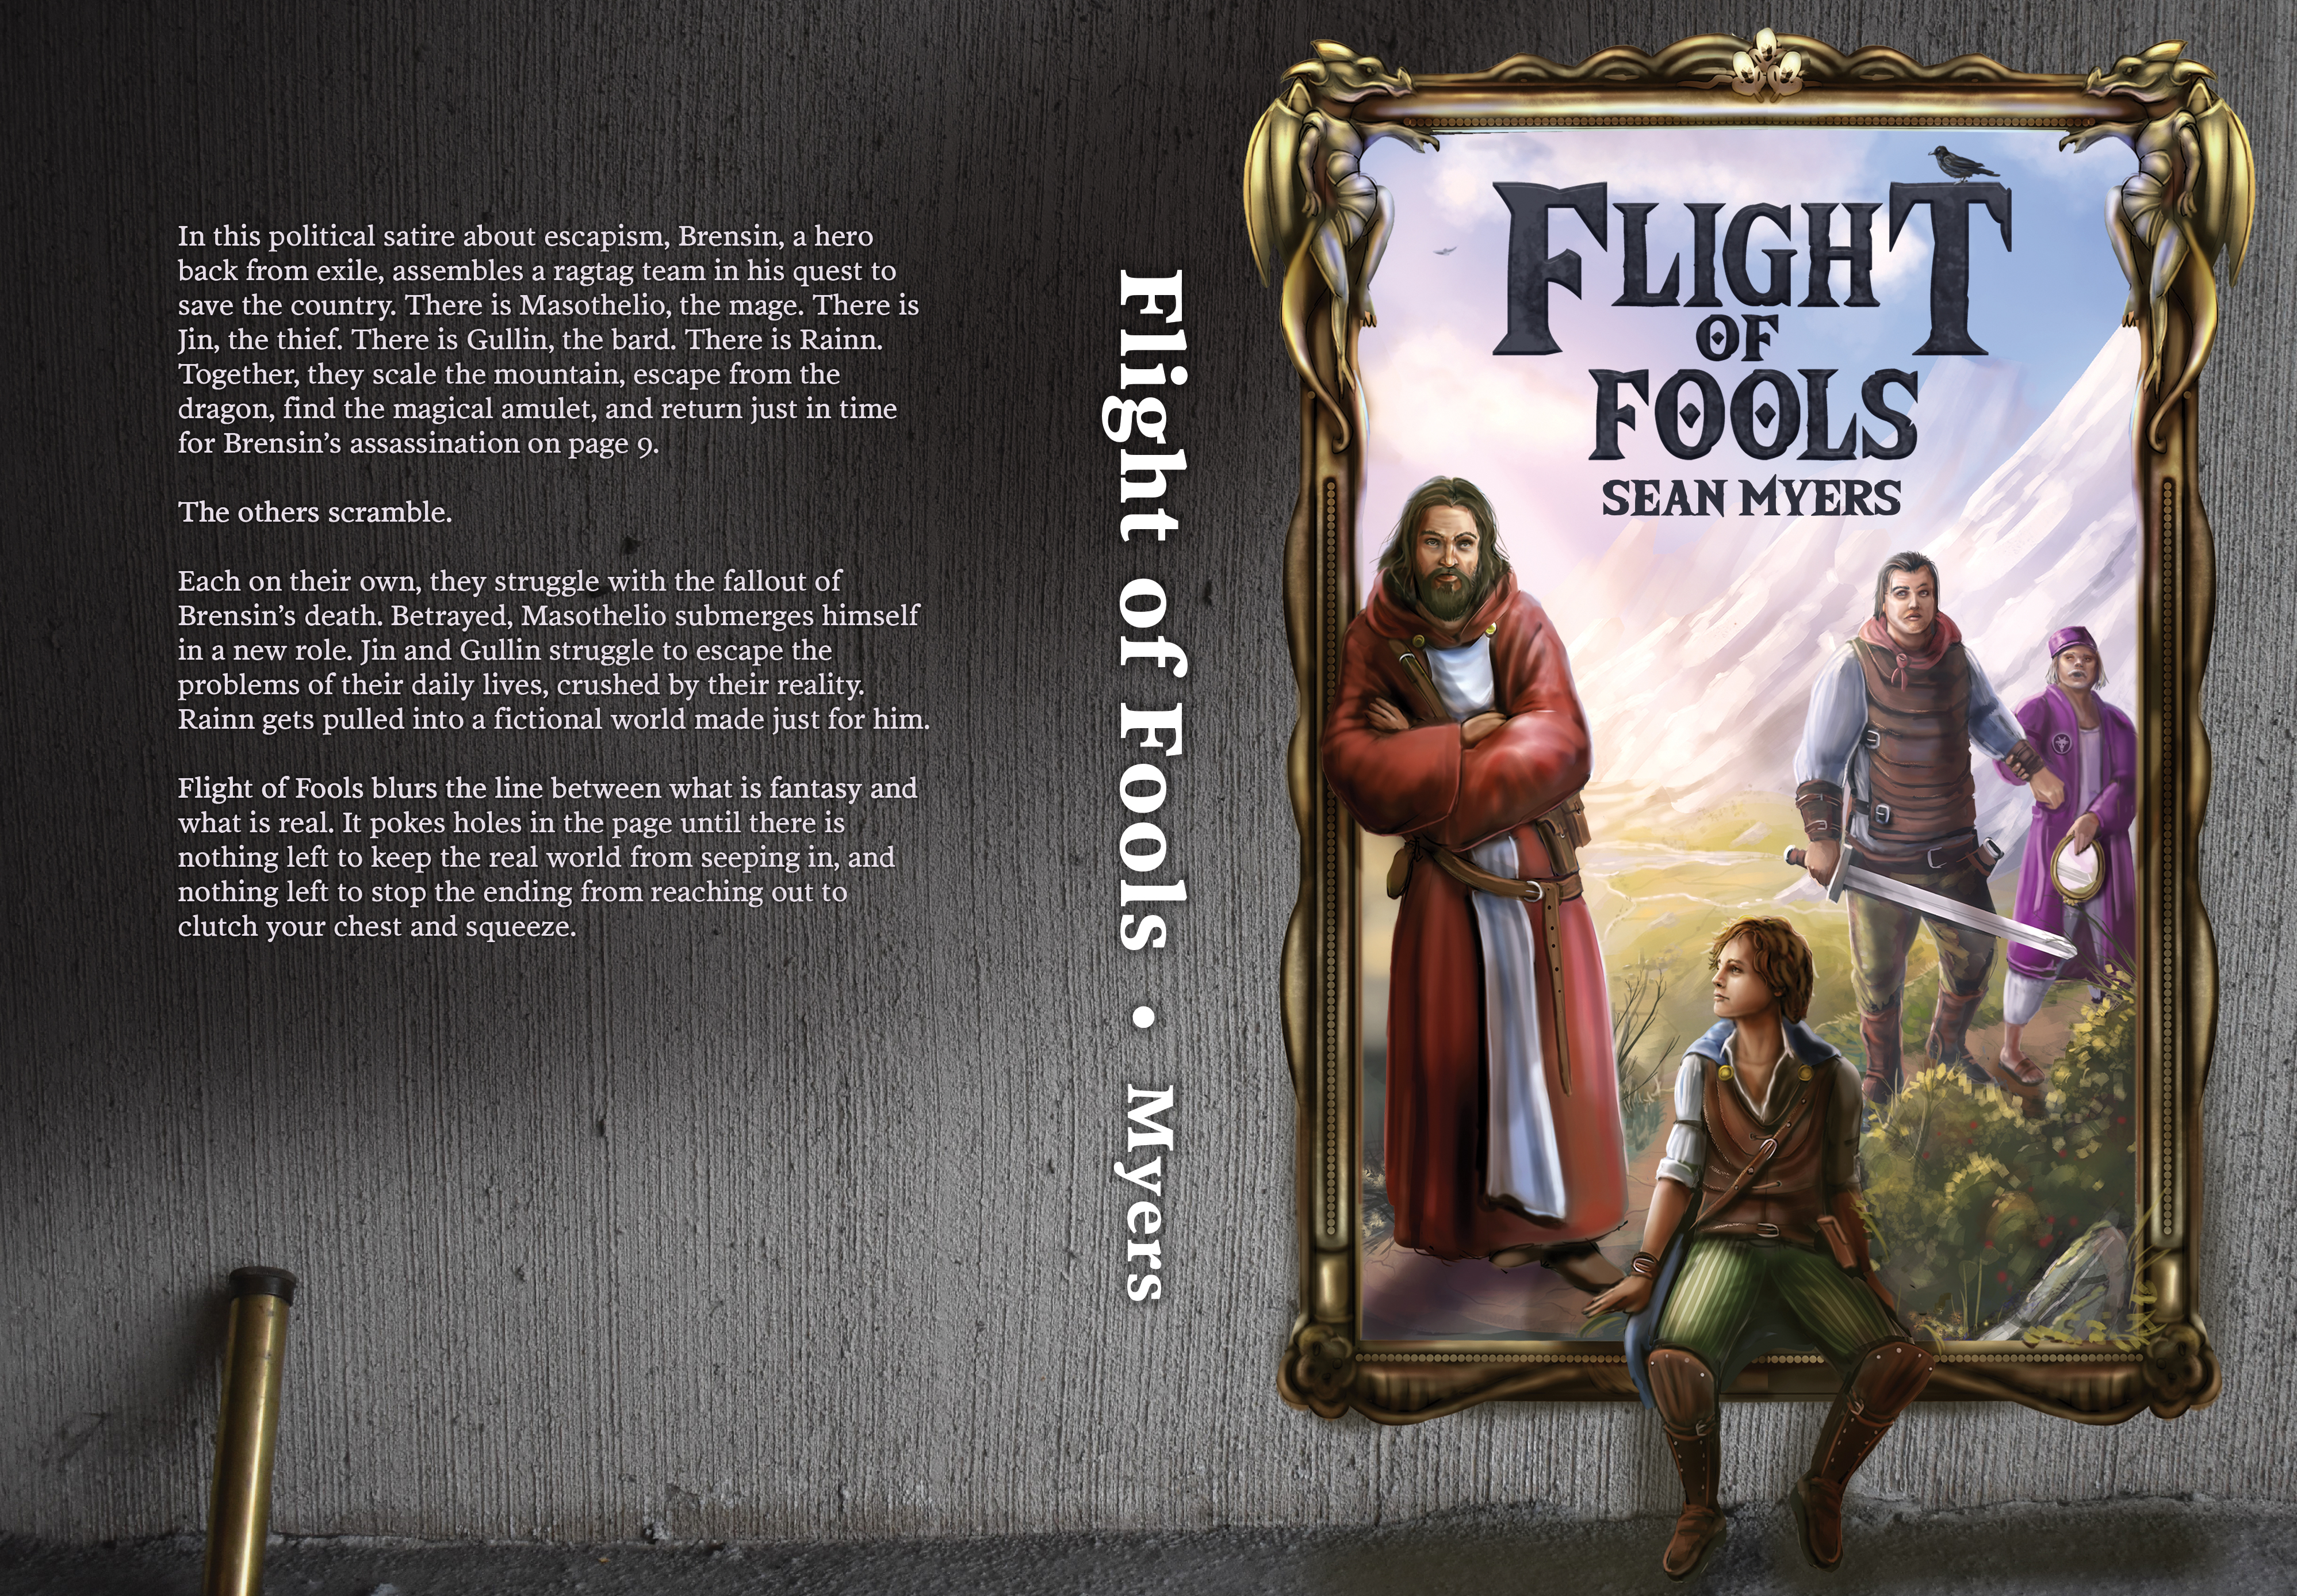 Fantasy art cover by The Noble Artist, for the fantasy novel, Flight of Fools by Sean Myers. Image shows a wizard, a rogue and a warrior on an adventure. All set within an ornate picture frame.